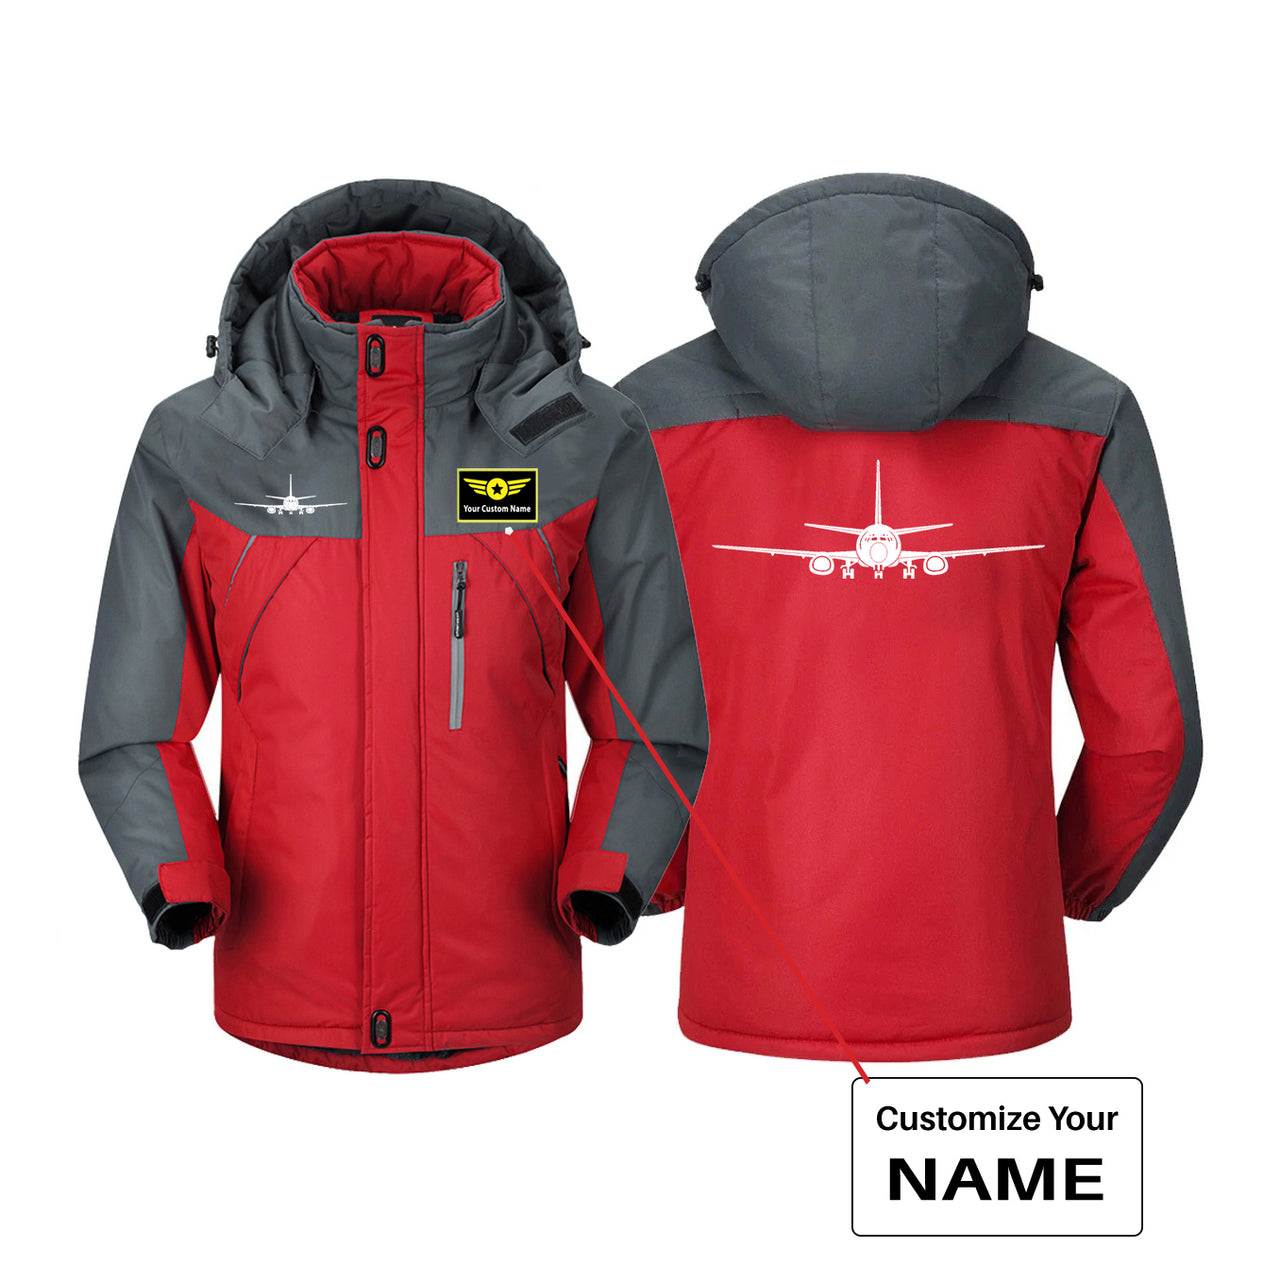 Boeing 737 Silhouette Designed Thick Winter Jackets